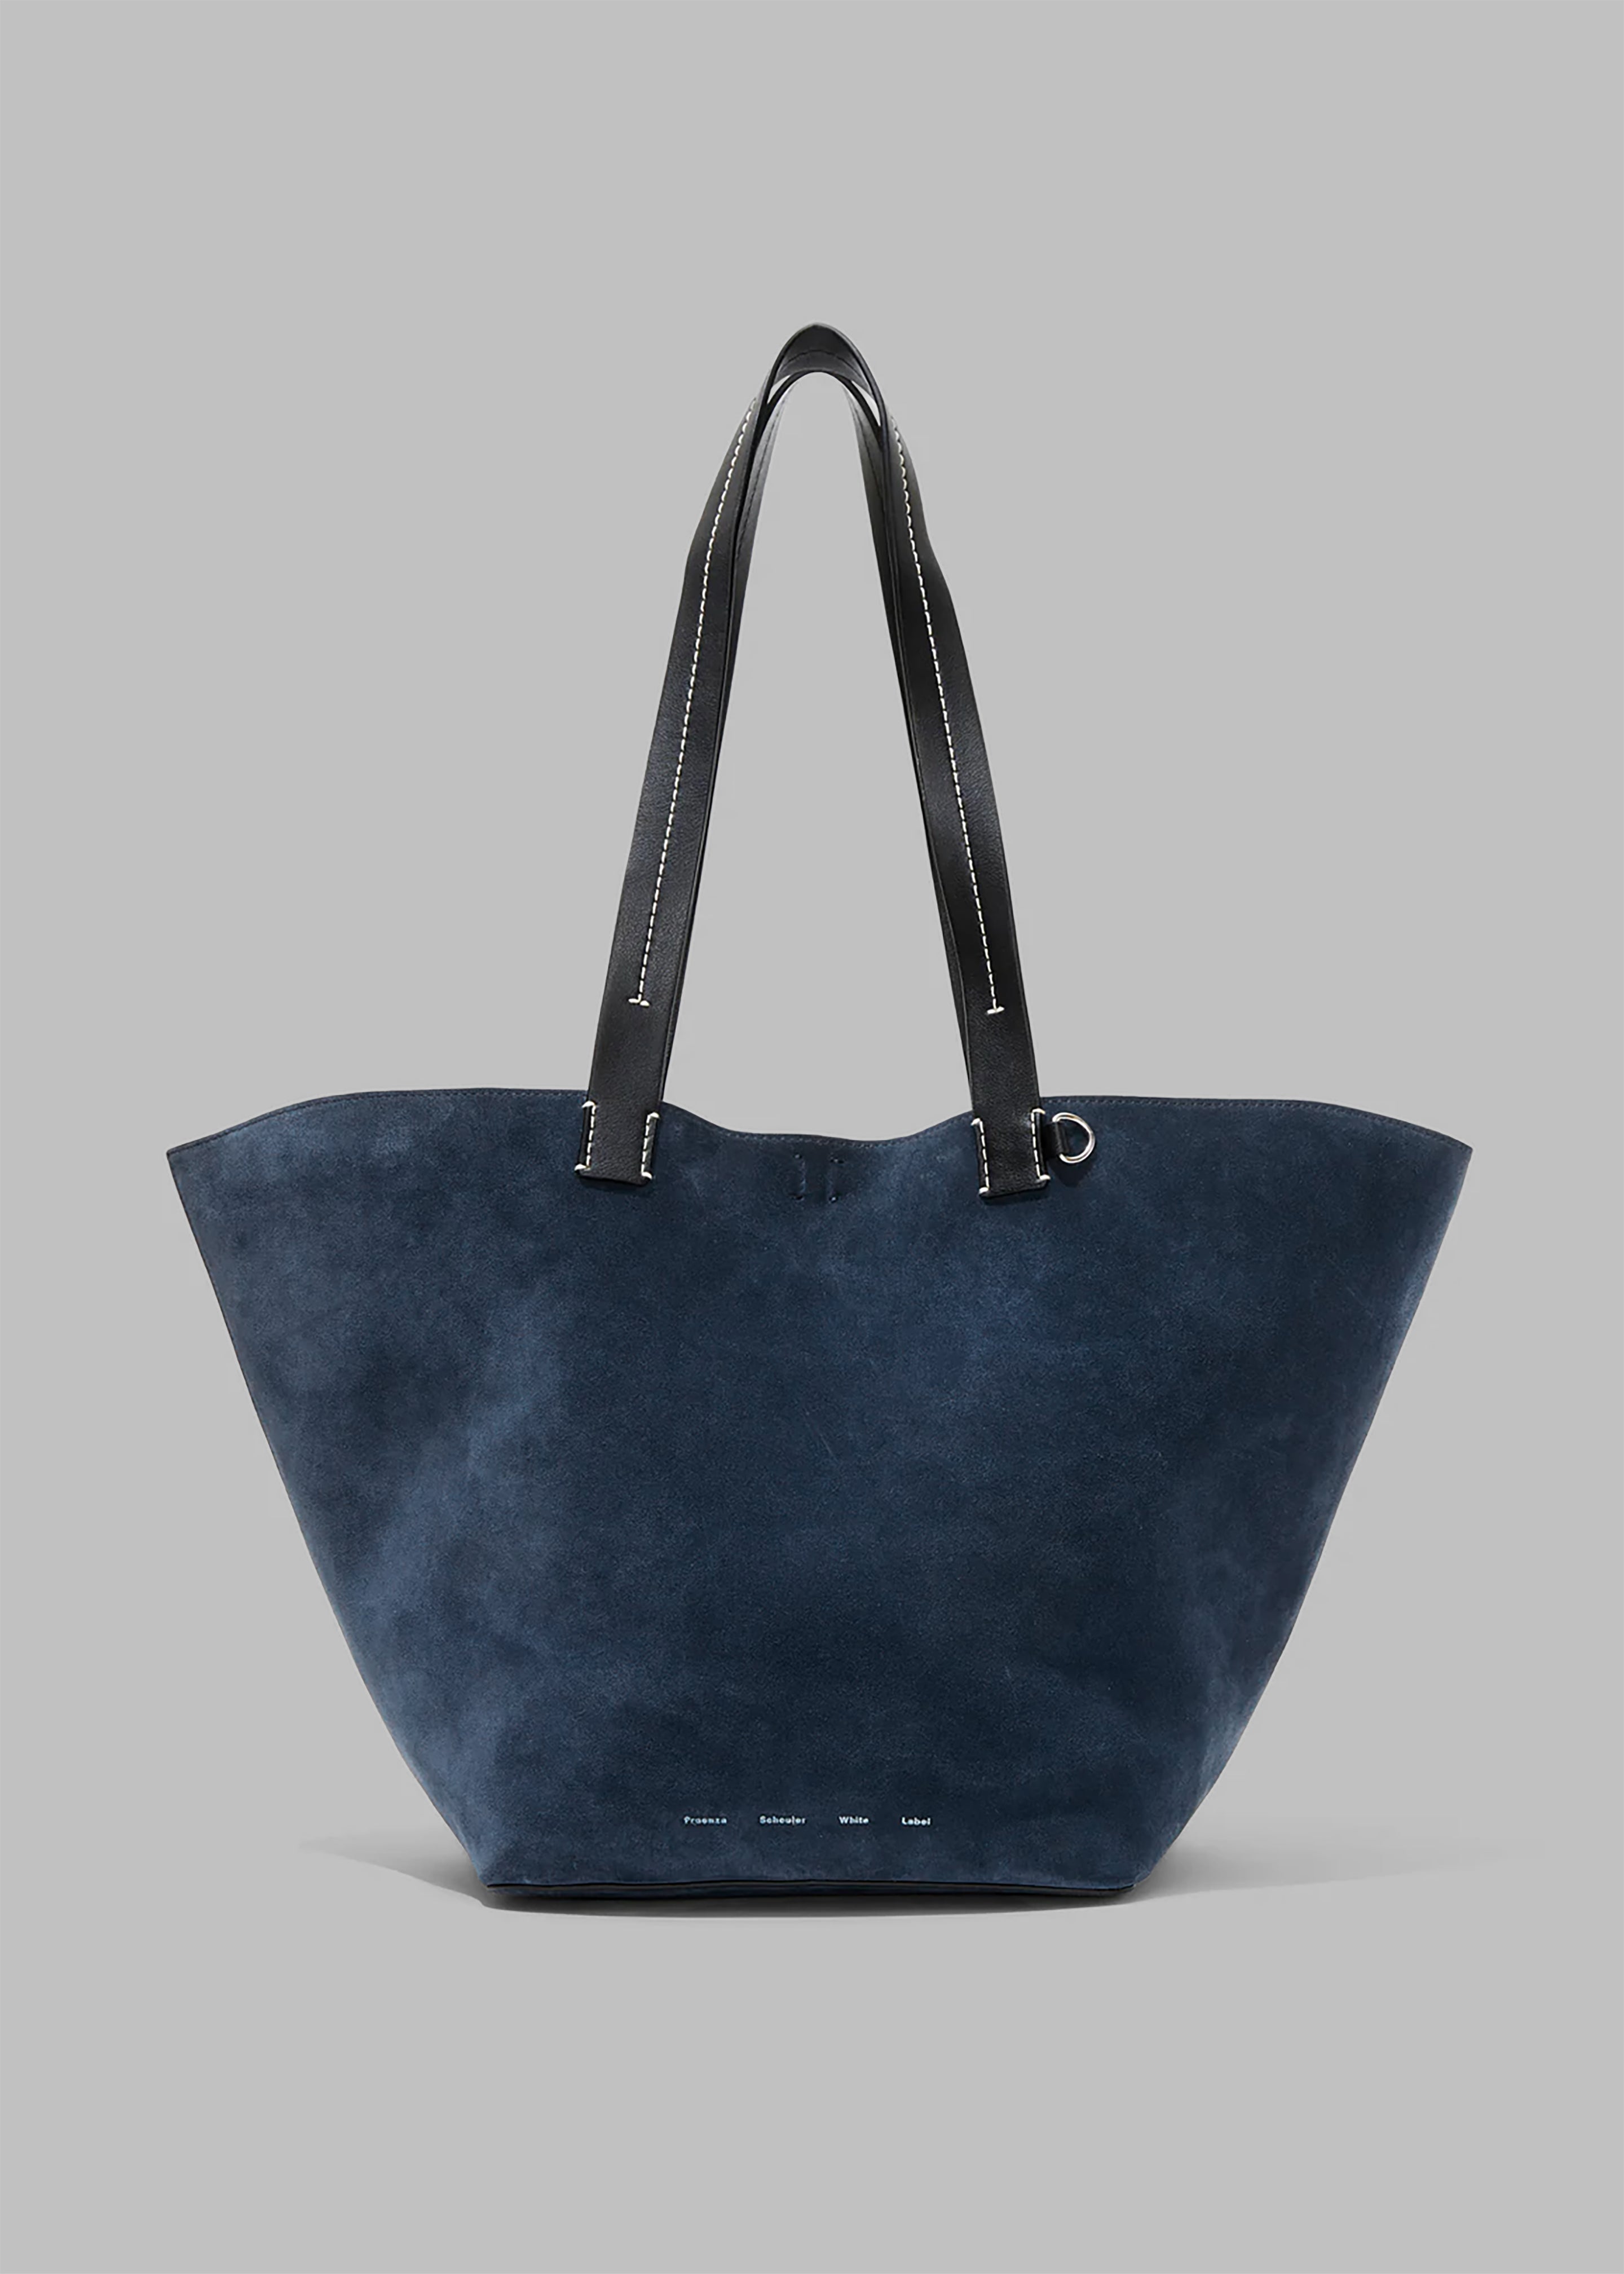 Proenza Schouler White Label Large Suede Bedford Tote - Navy/Black - 7